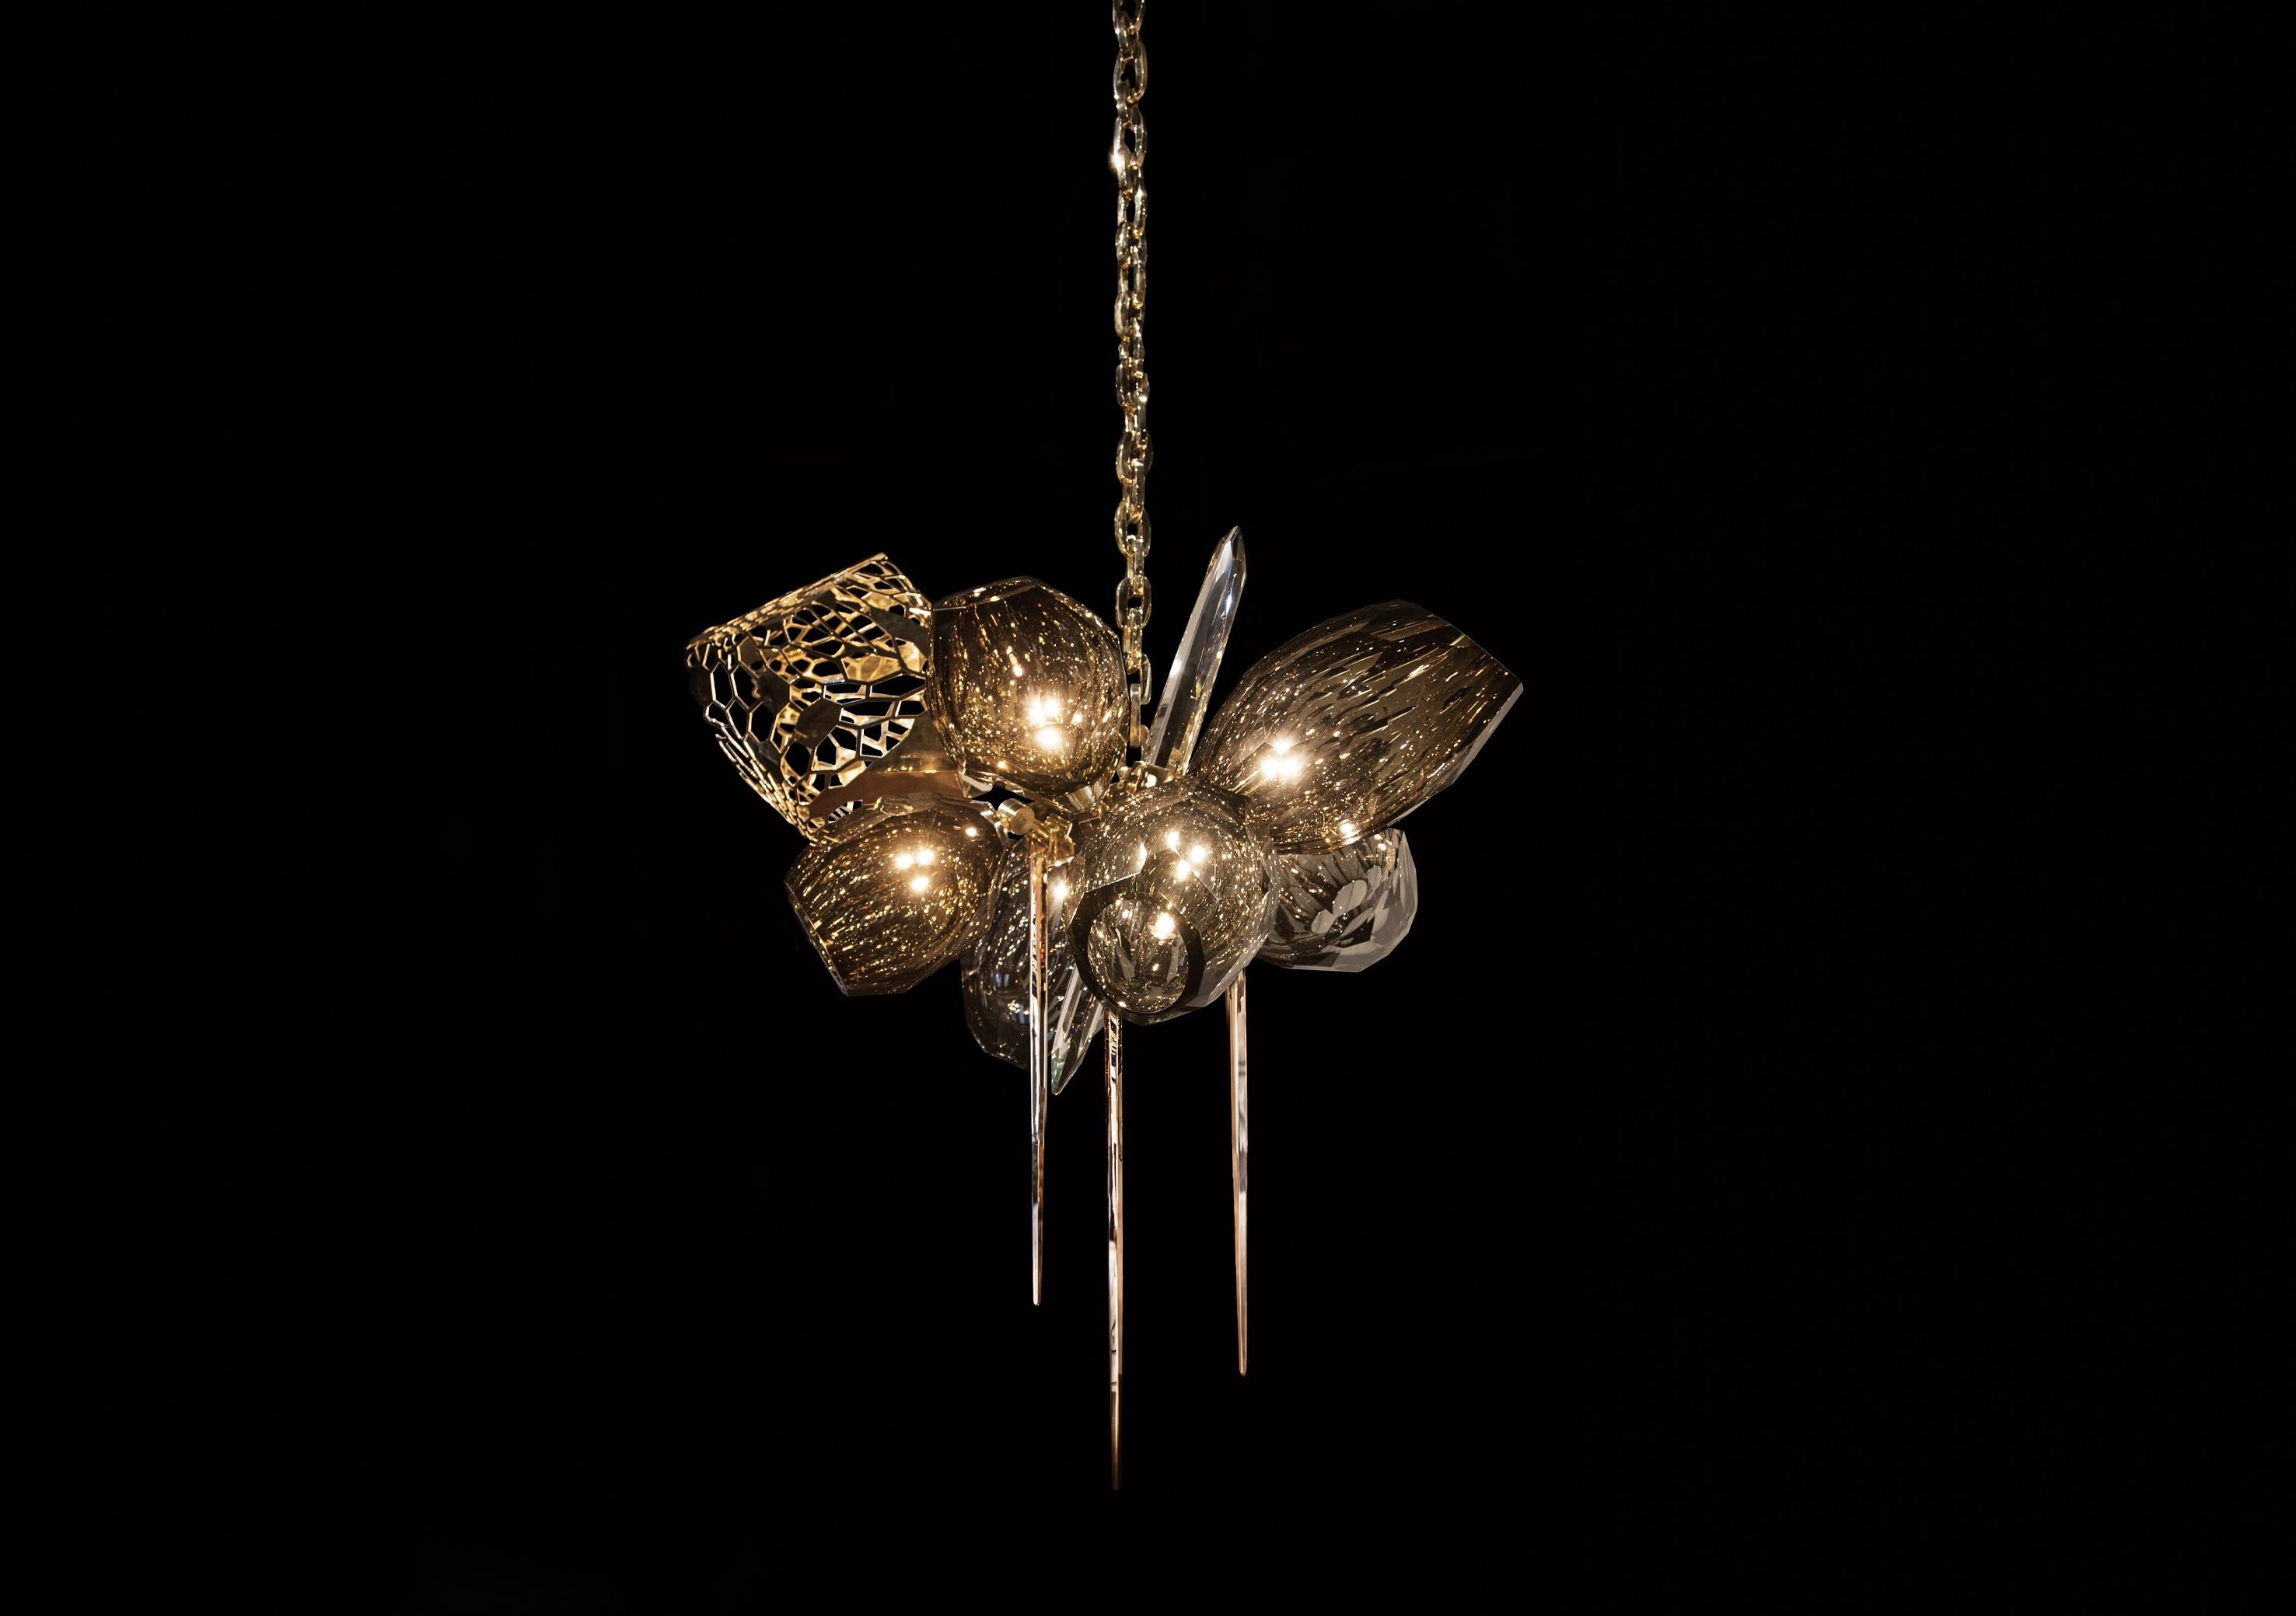 Transferring traditional Murano glassware design and craftsmanship into a contemporary work of art, the Britannica Chandelier by Barlas Baylar is born from an artistic interpretation of lighting for a modern approach to illumination.  The Britannica